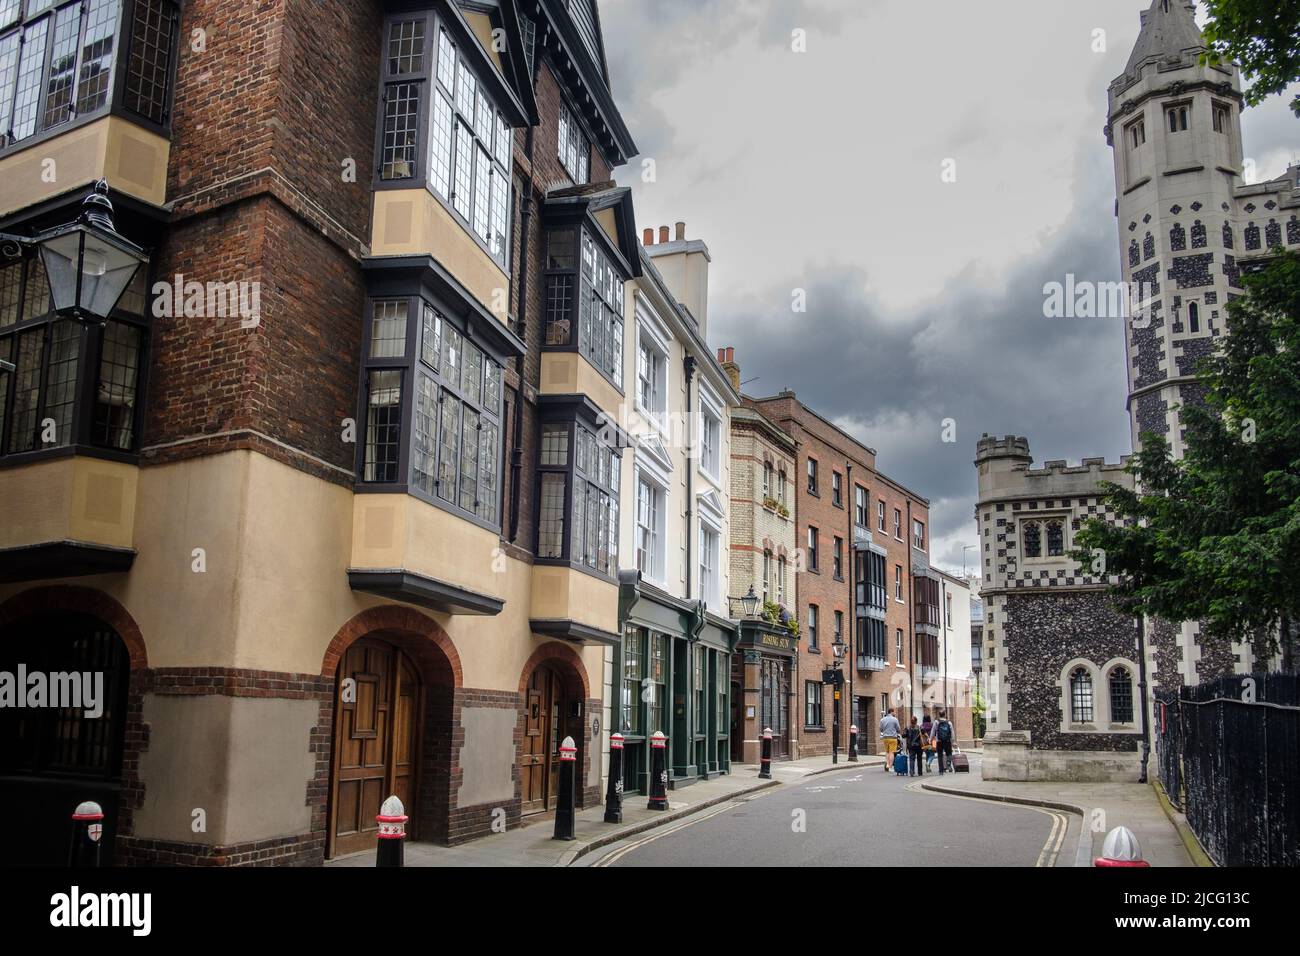 Cloth Fair, Smithfield, on the left no. 41/42 the oldest residential dwelling in London, on the right the church of St. Bartholomew-the-Great. Stock Photo